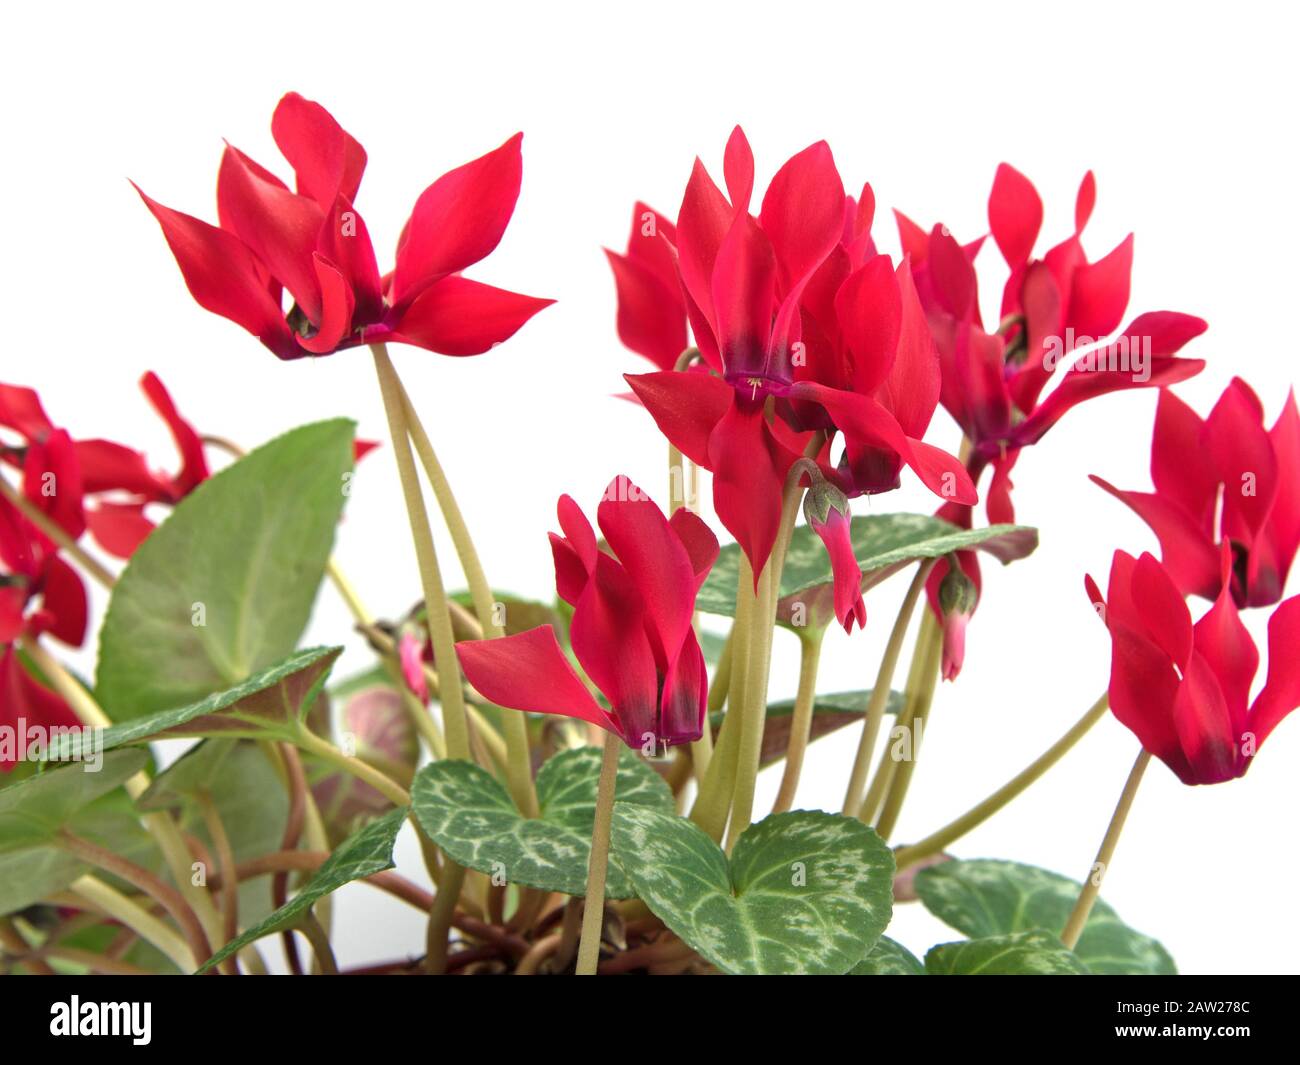 Blooming cyclamen against white background Stock Photo